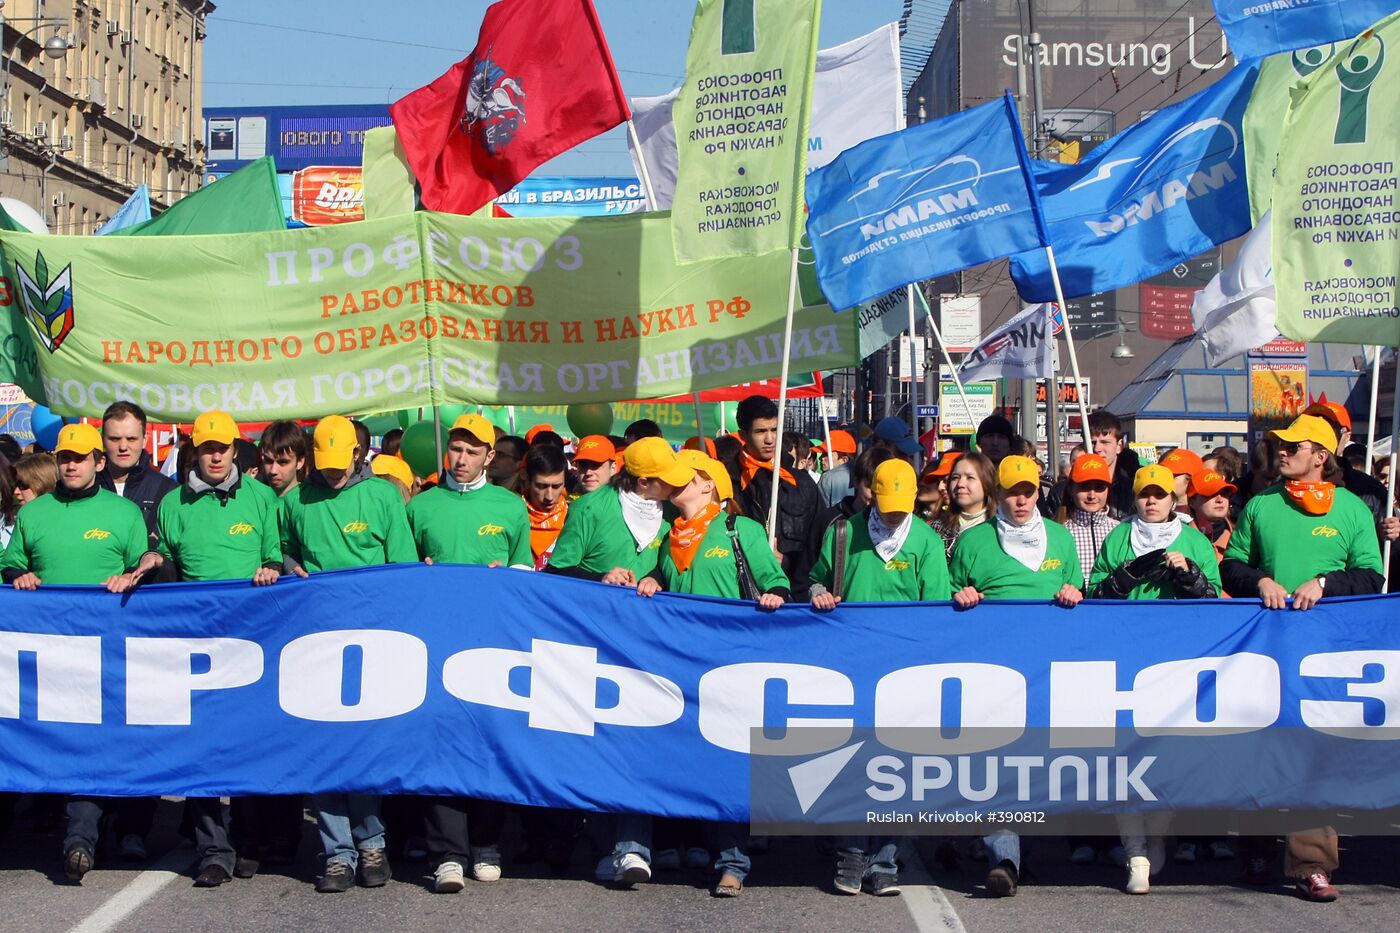 Spring and Labor Day march in Moscow